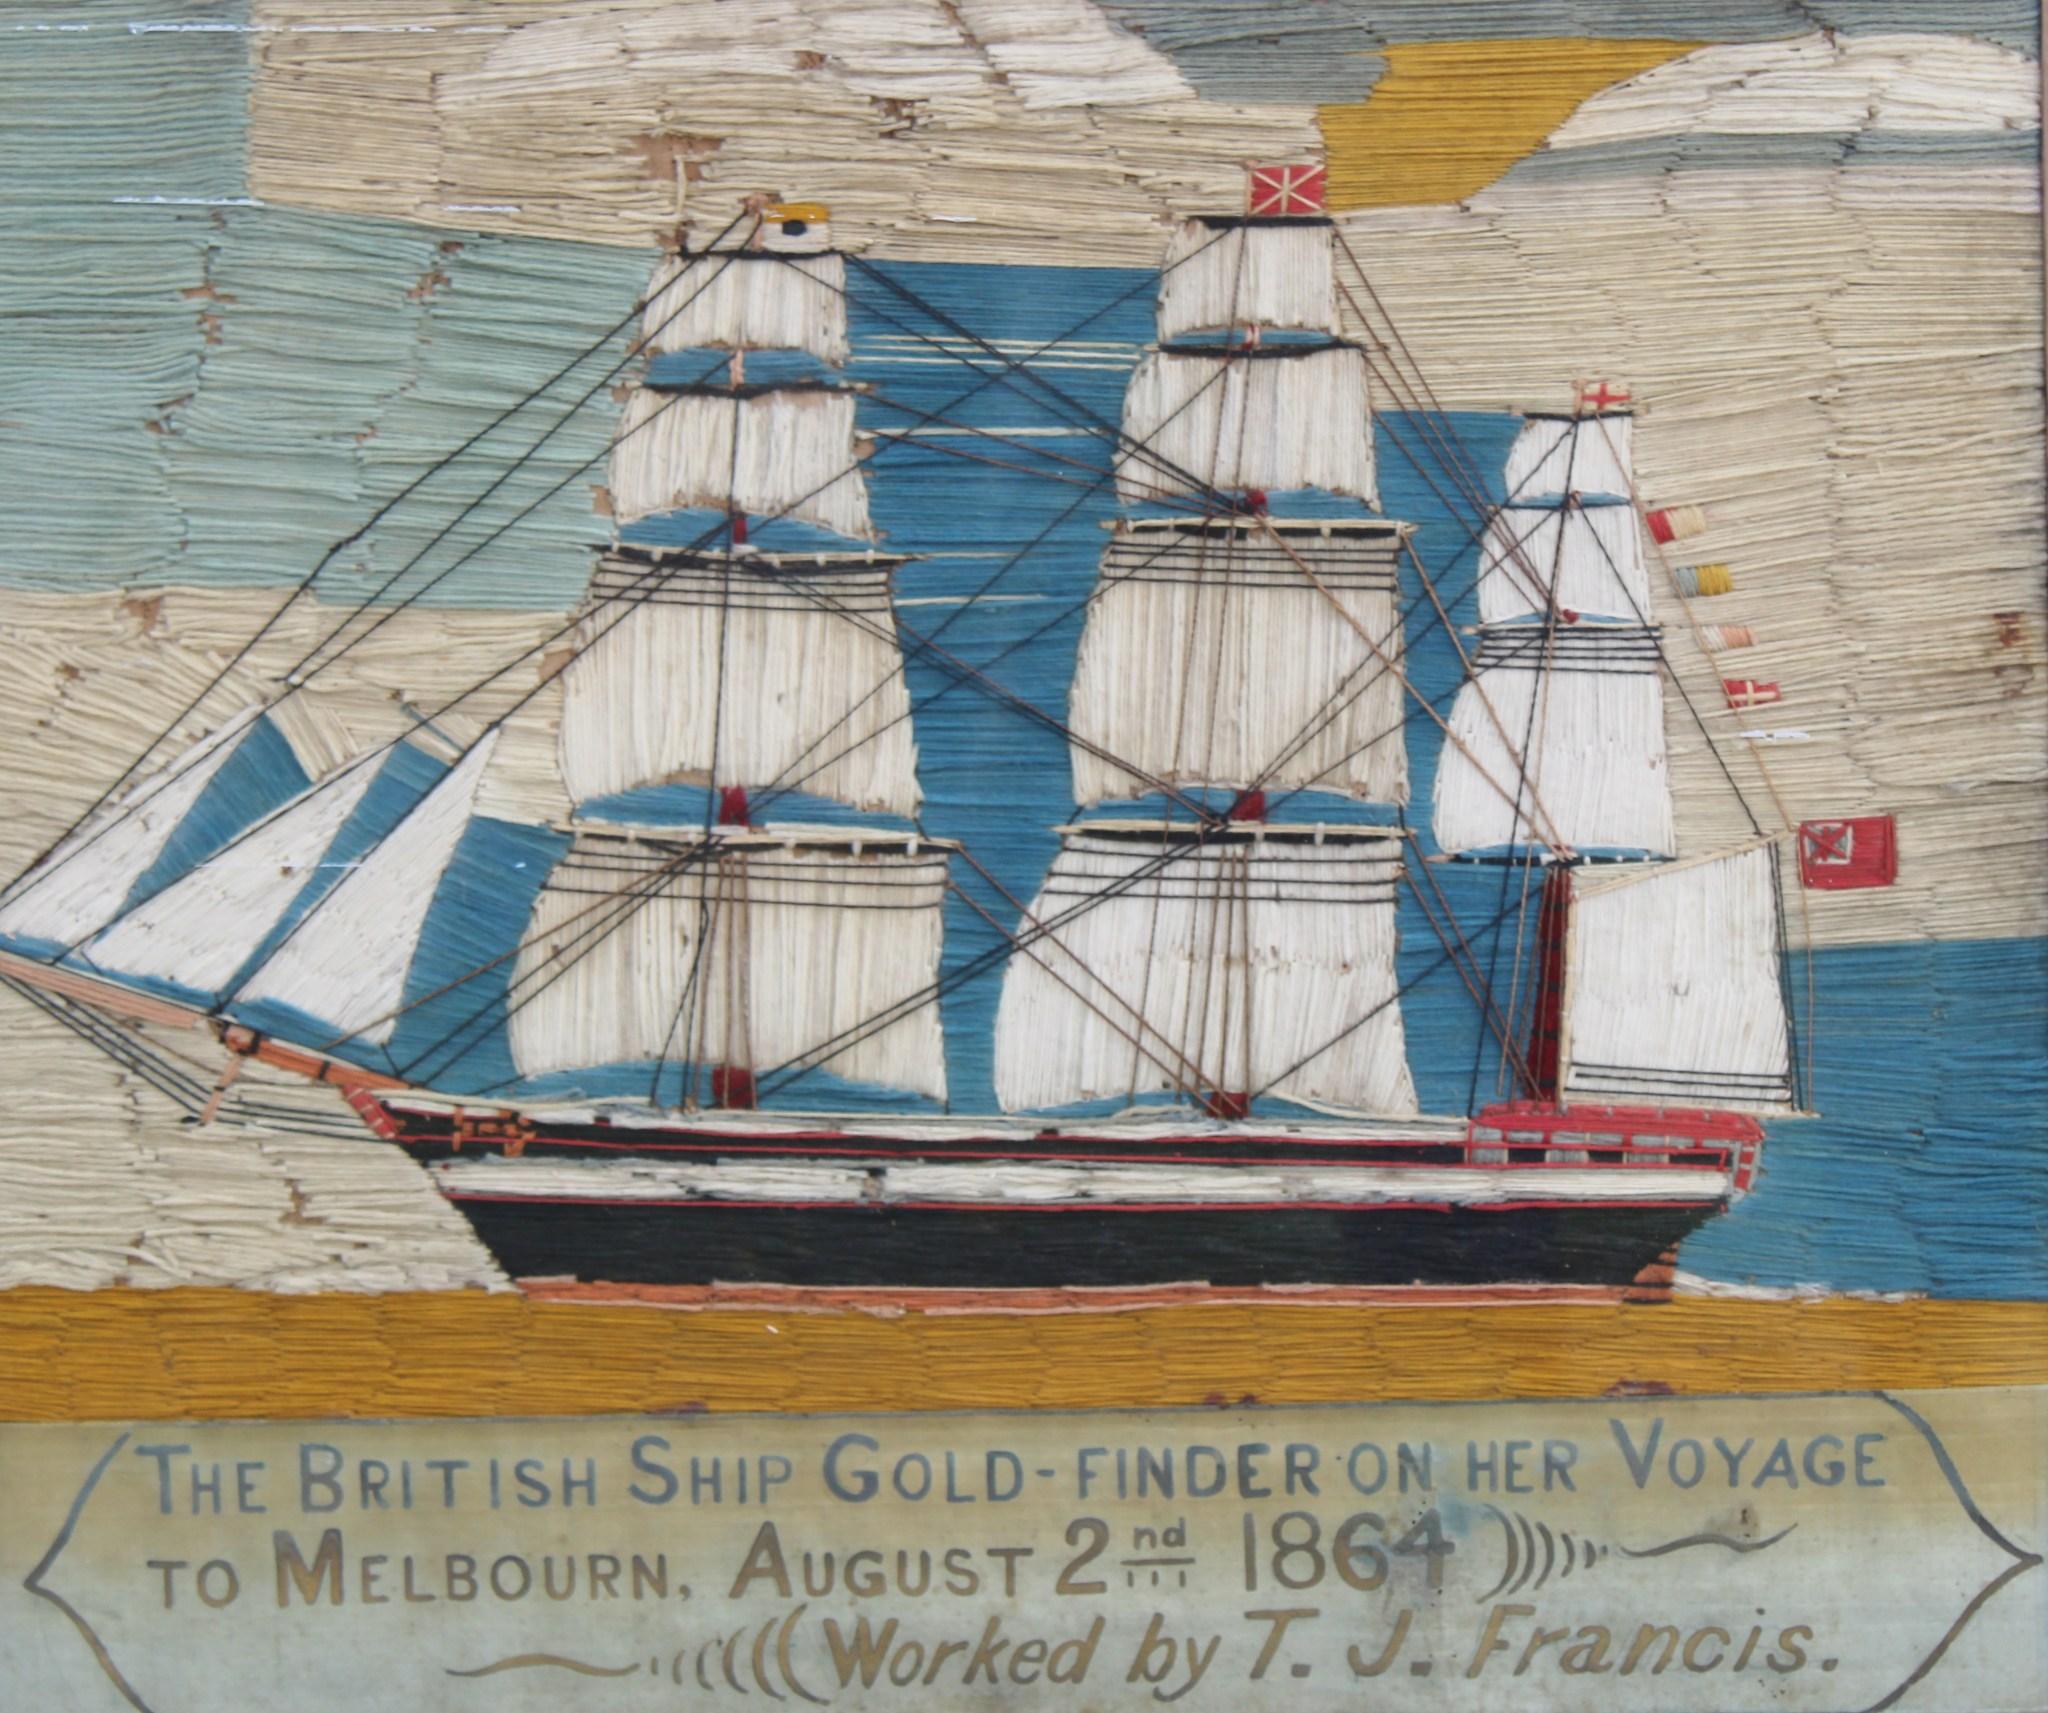 Sailor's Woolwork Nautical Picture,
Inscribed:The British Ship Gold Finder on her voyage to Melbourn, August 2, 1864. Worked by T.J. Francis,
Circa 1864

This sailor's woolwork depicts aportside view of the the Gold Finder.  The Gold Finder was a